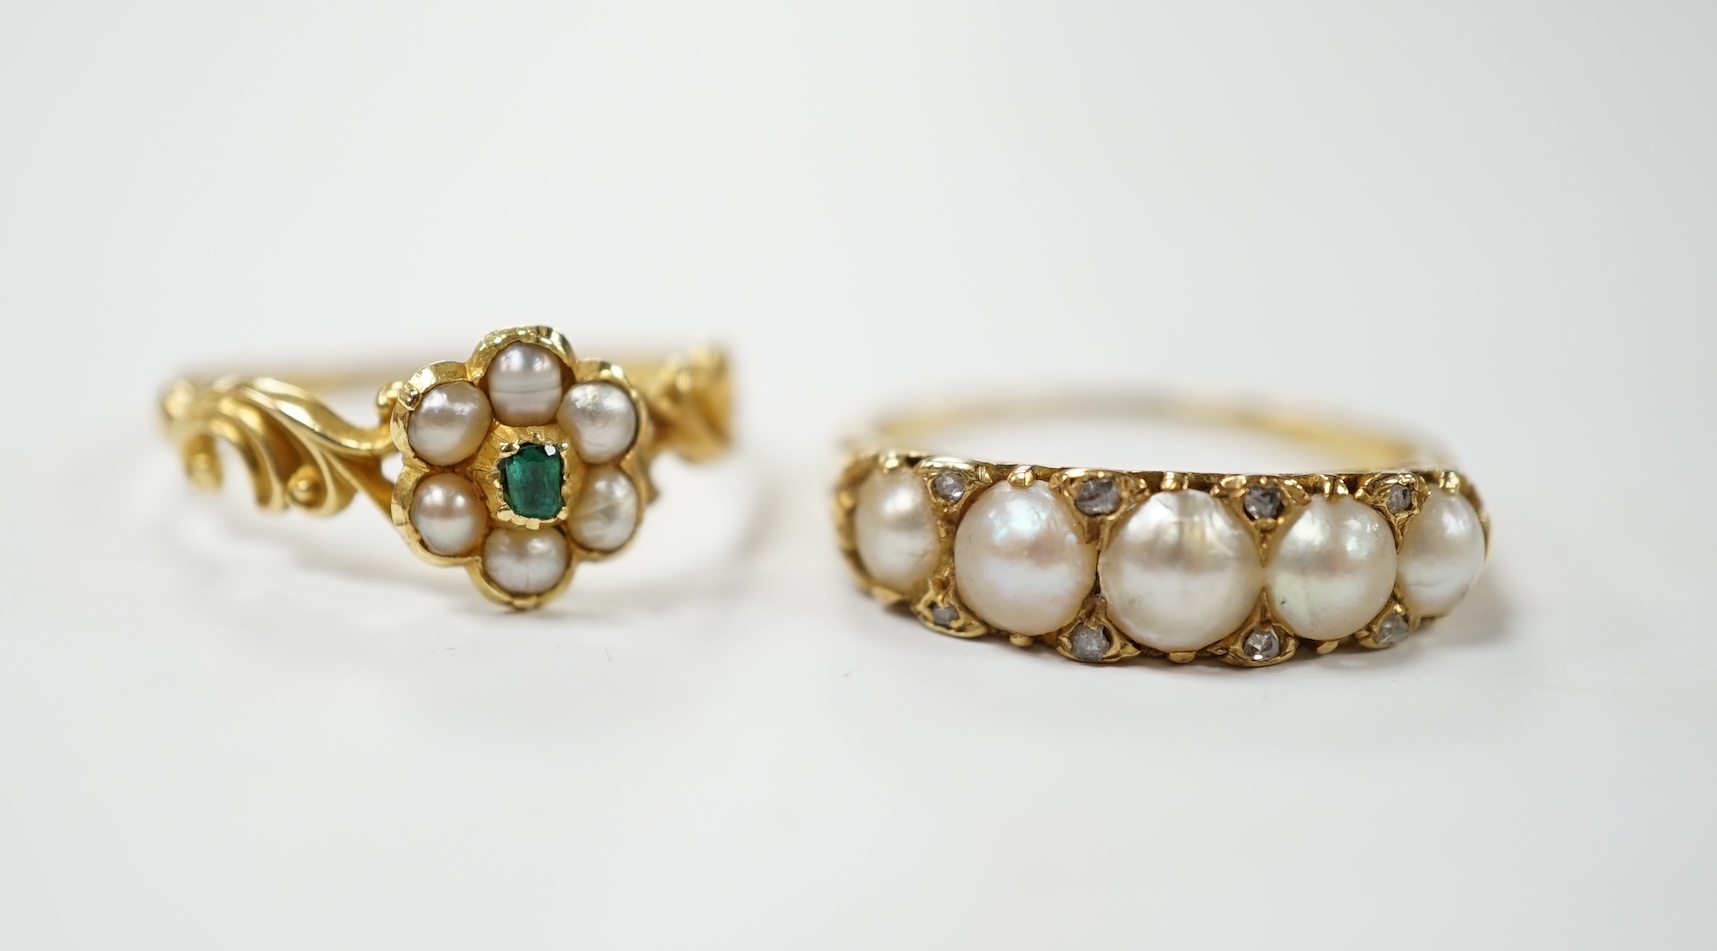 A yellow metal and graduated split pearl set half hoop ring with diamond chip spacers, size Q and a similar emerald and seed pearl flower head cluster ring, gross weight 5.7 grams. Condition - fair